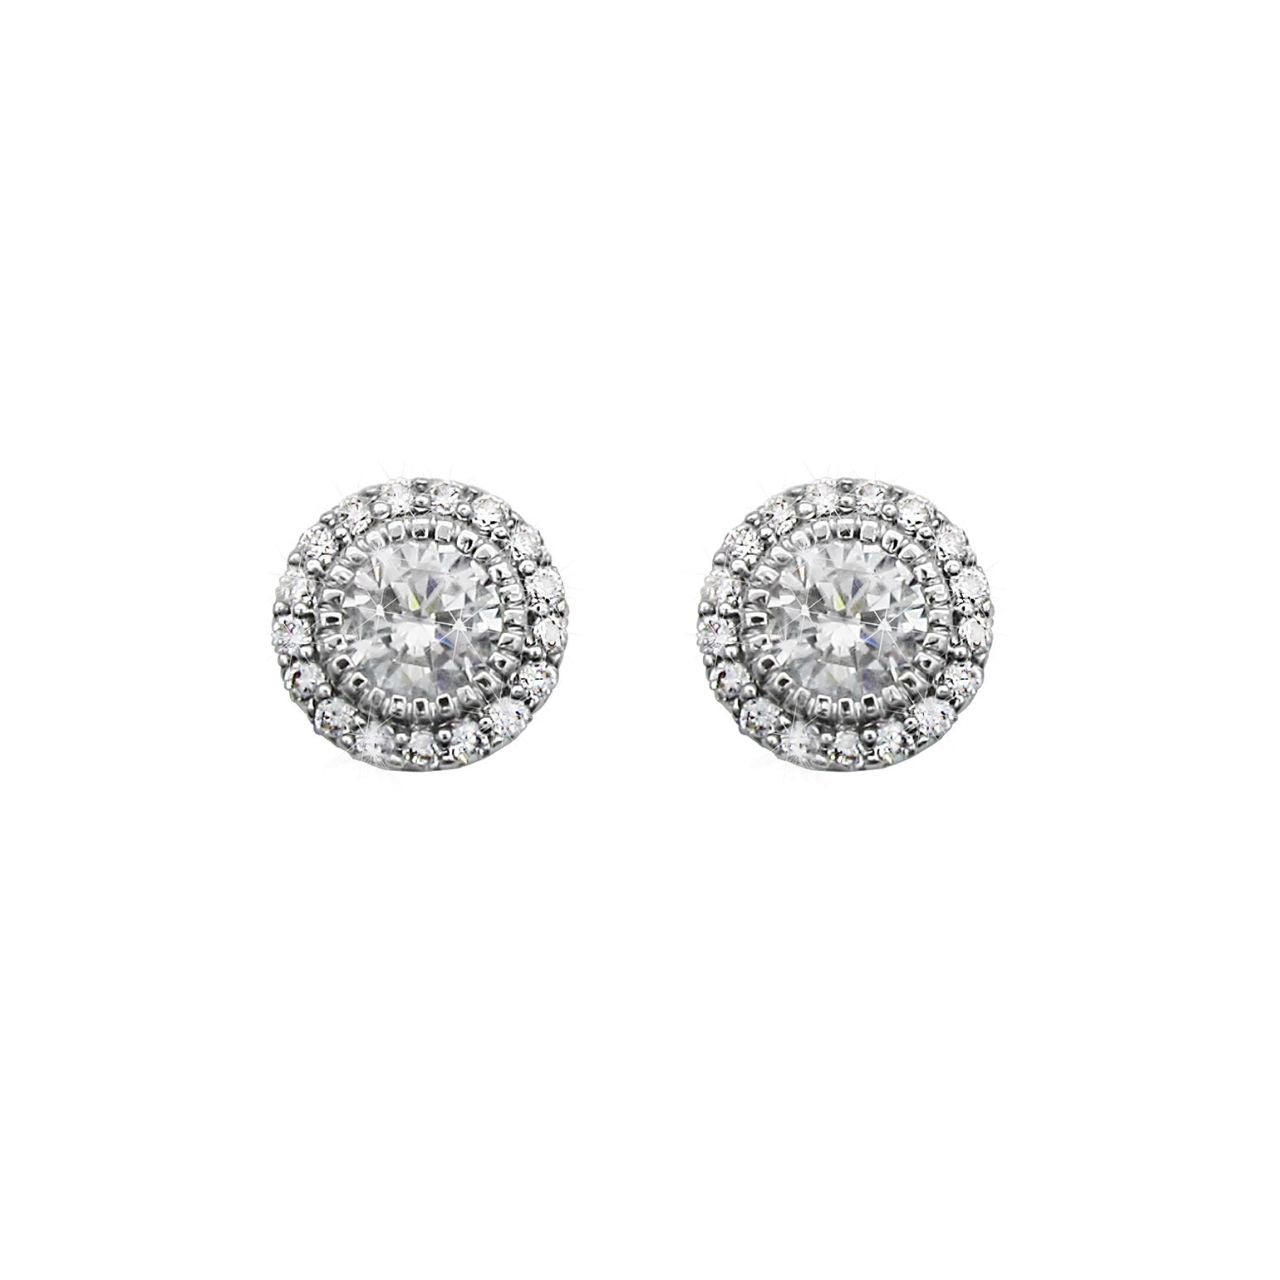 Silver Stud Cz With Pave Surround Earrings by Tipperary Crystal  Perfect for day or evening wear, these elegant crystal post earrings will add sparkle with every turn of the head. Fashioned in timeless silver, each earring features a round cz stone, cut to sparkle and shimmer, wrapped in an embrace of tiny clear crystal accents. A radiant marriage of crystals and cool silver, brilliantly buffed these post earrings secure comfortably with push backs.